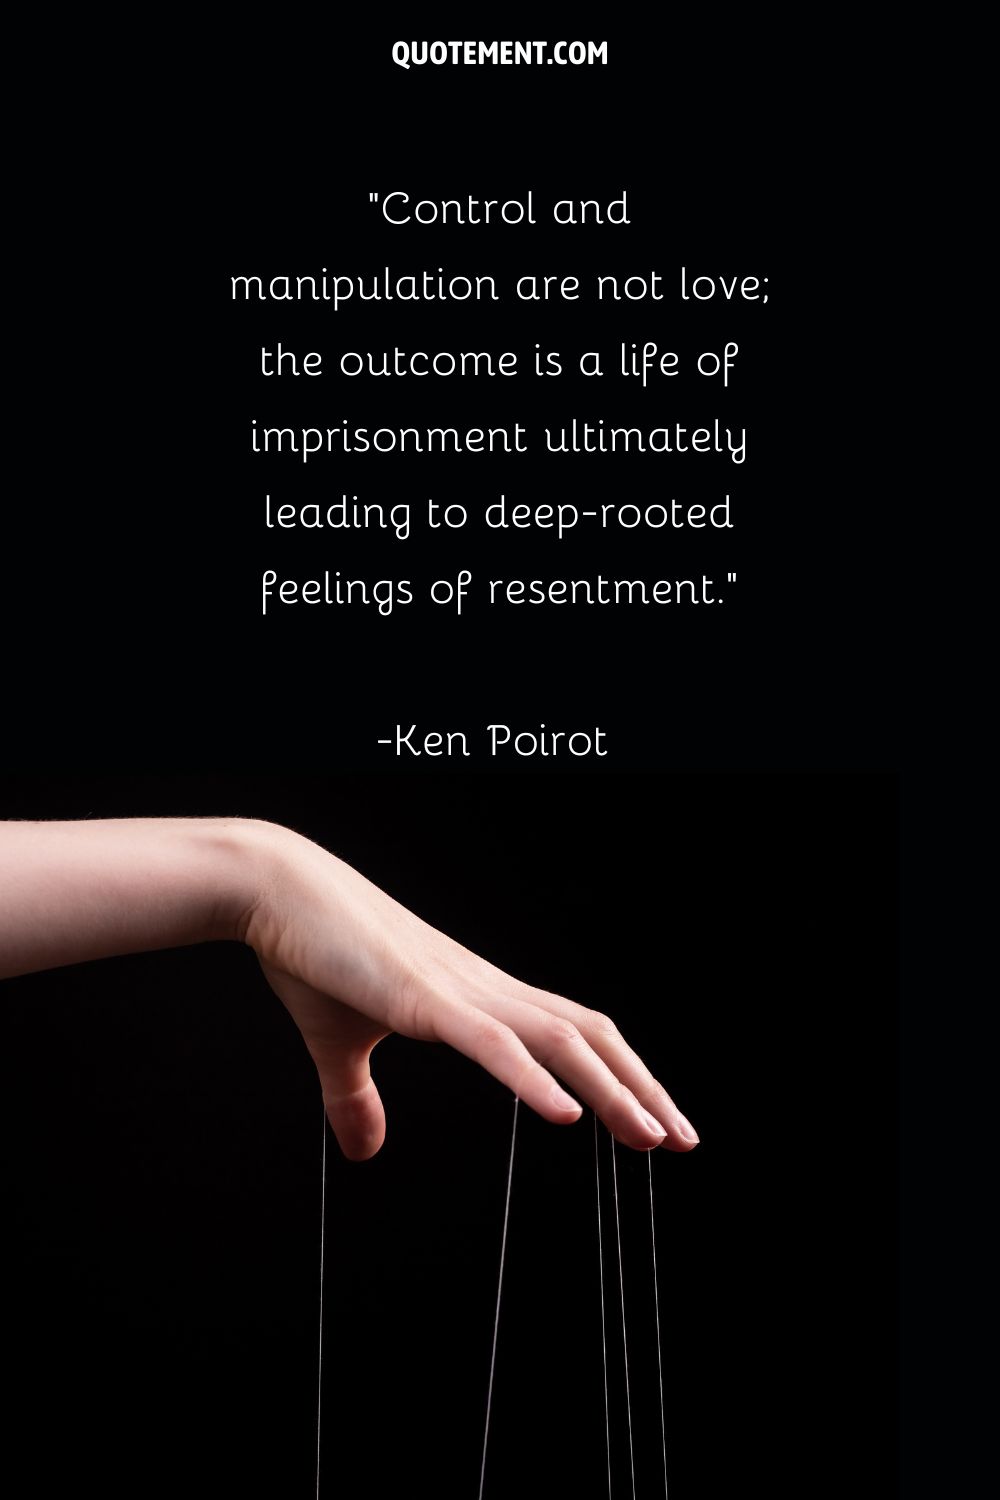 hand with strings image representing quote on control and love